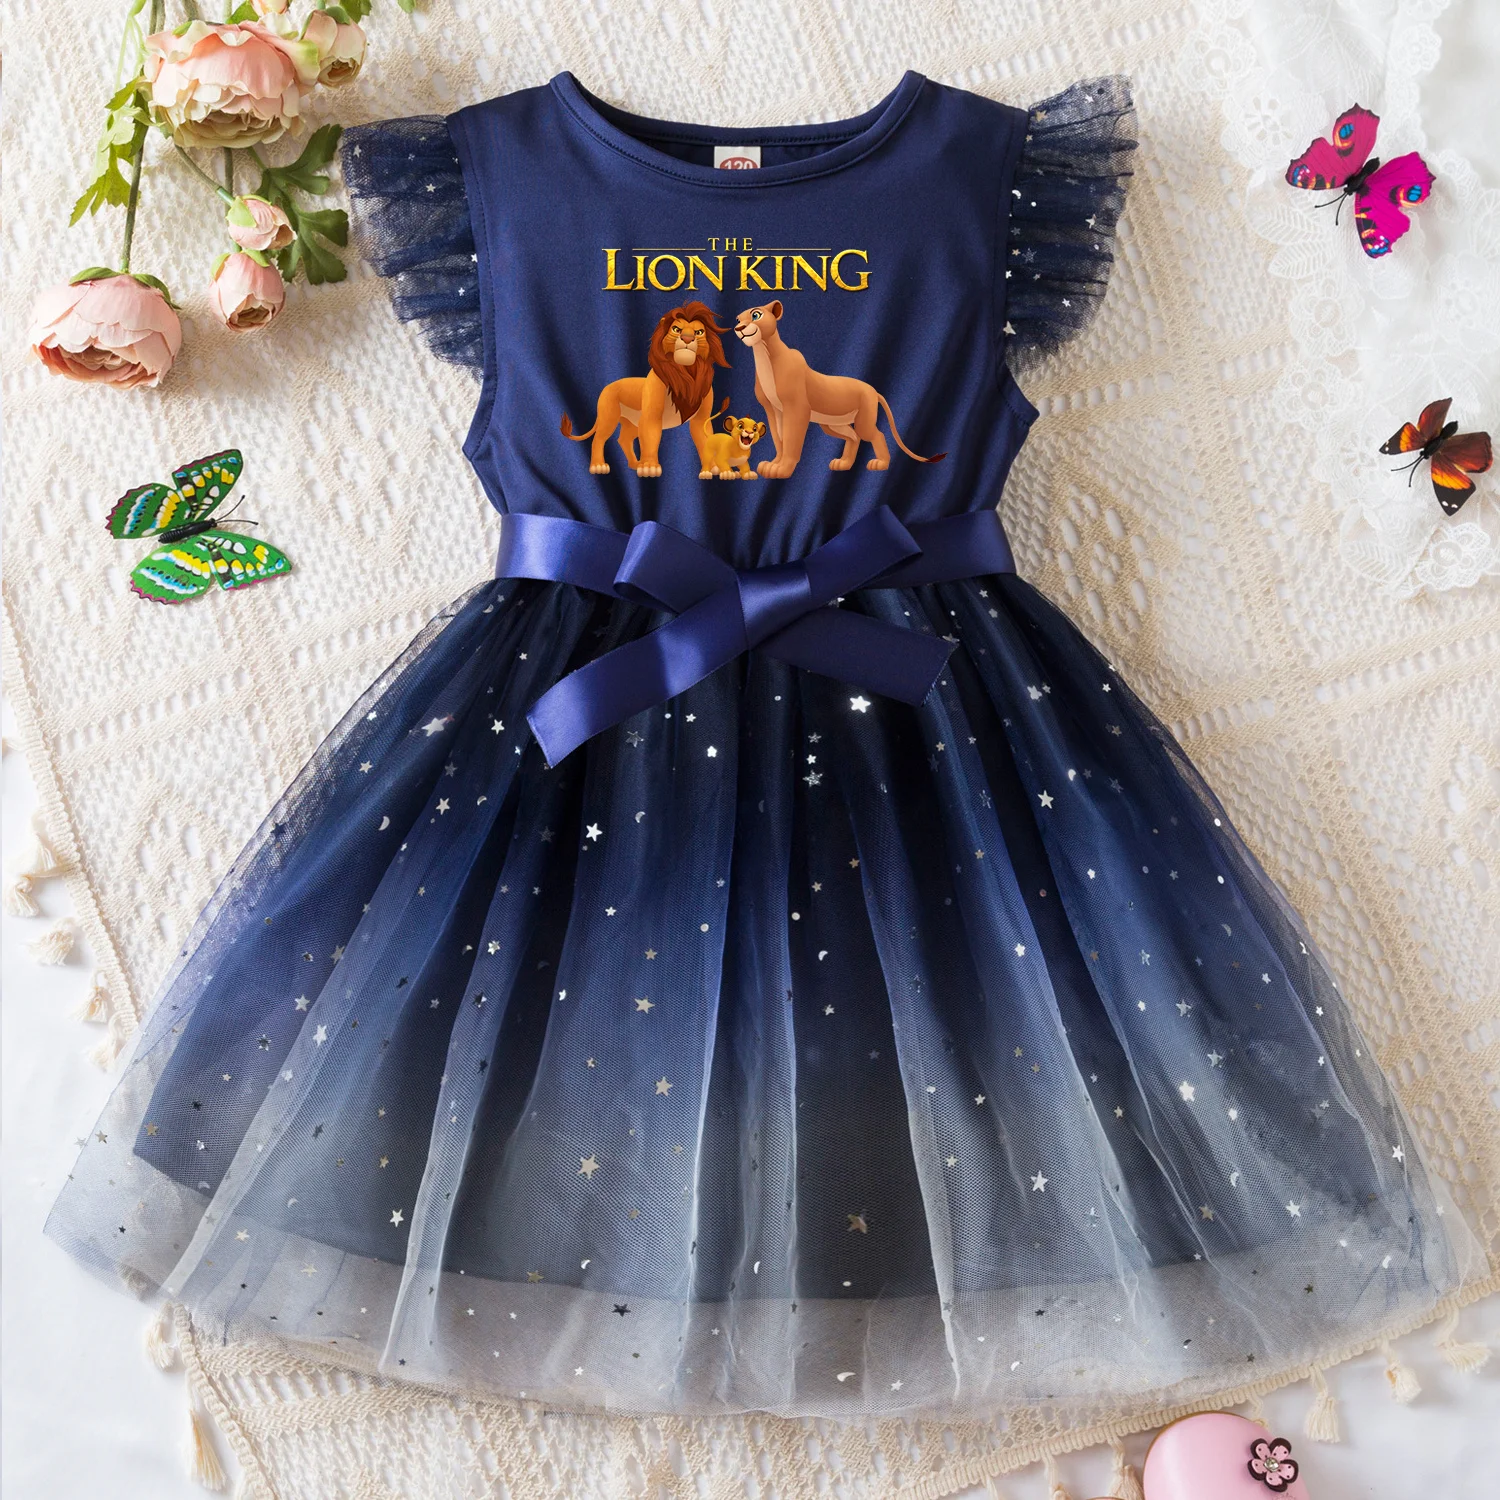 

The Lion King Summer Toddler Girl Dress Princess Star Baby Girls Clothes Tulle Tutu Dress for Children Party Dress 2-6Y